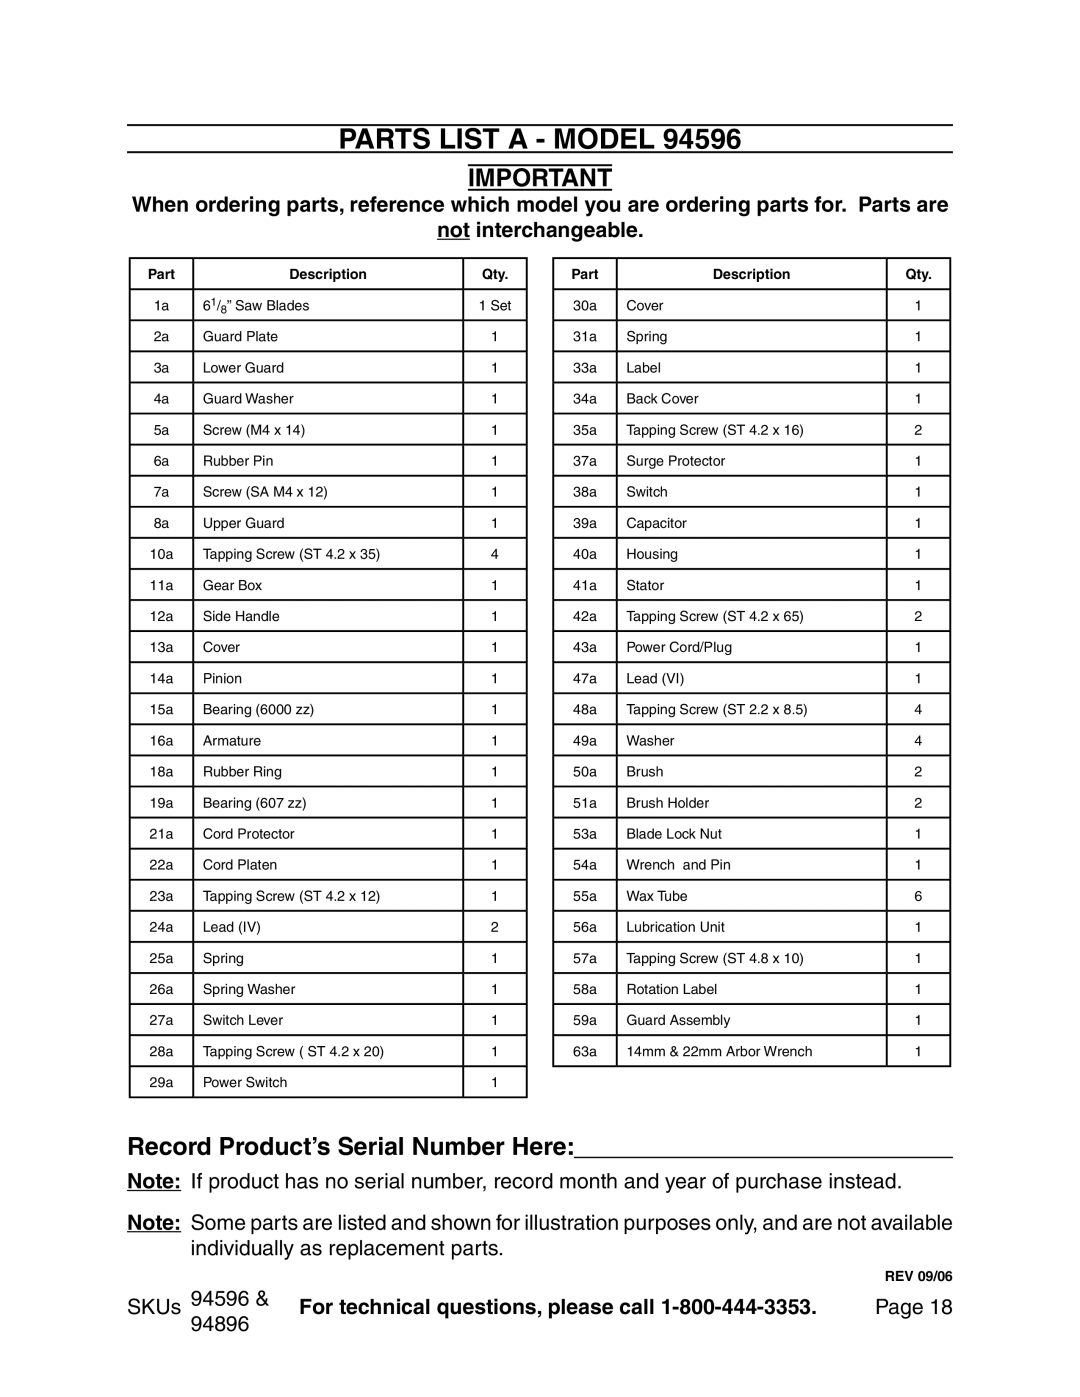 Chicago Electric 94596 manual PARTS LIST A - Model, Record Product’s Serial Number Here, not interchangeable, Page 